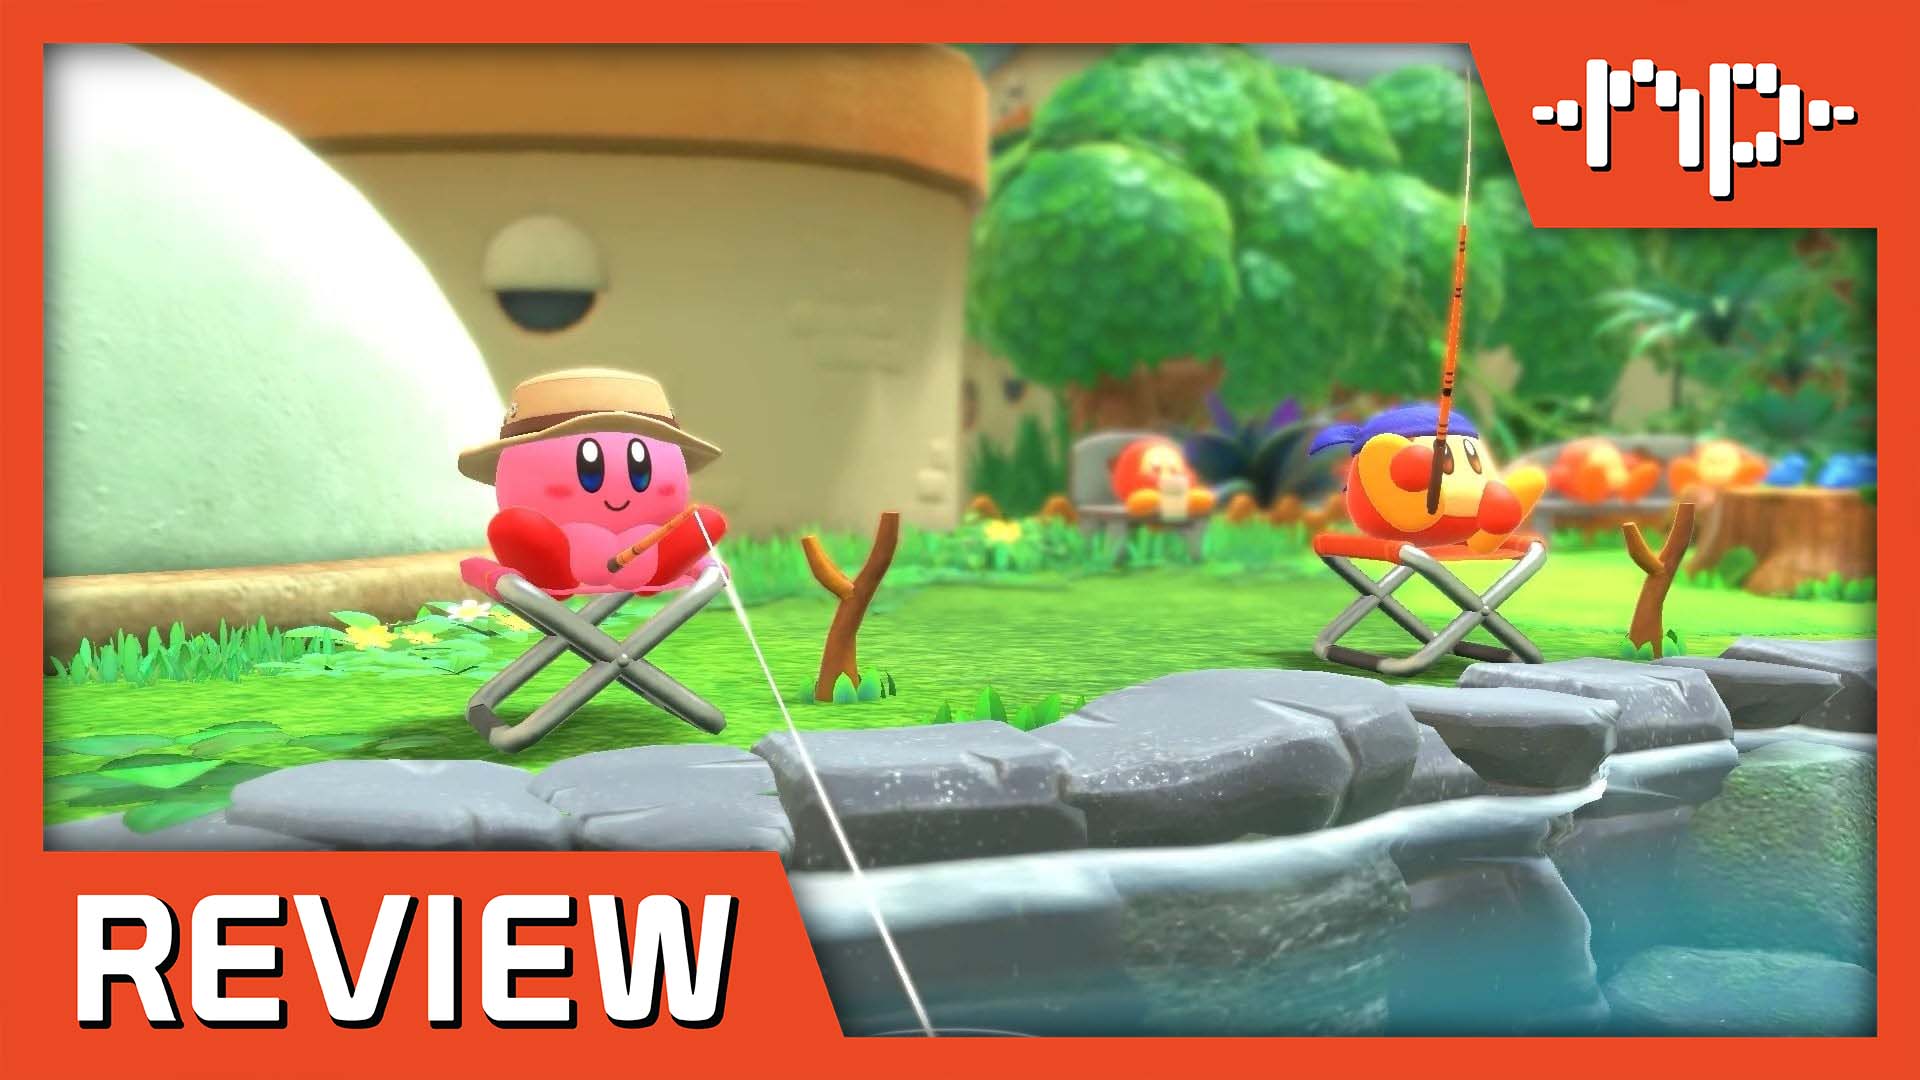 Games Like 'Kirby and the Forgotten Land' to Play Next - Metacritic